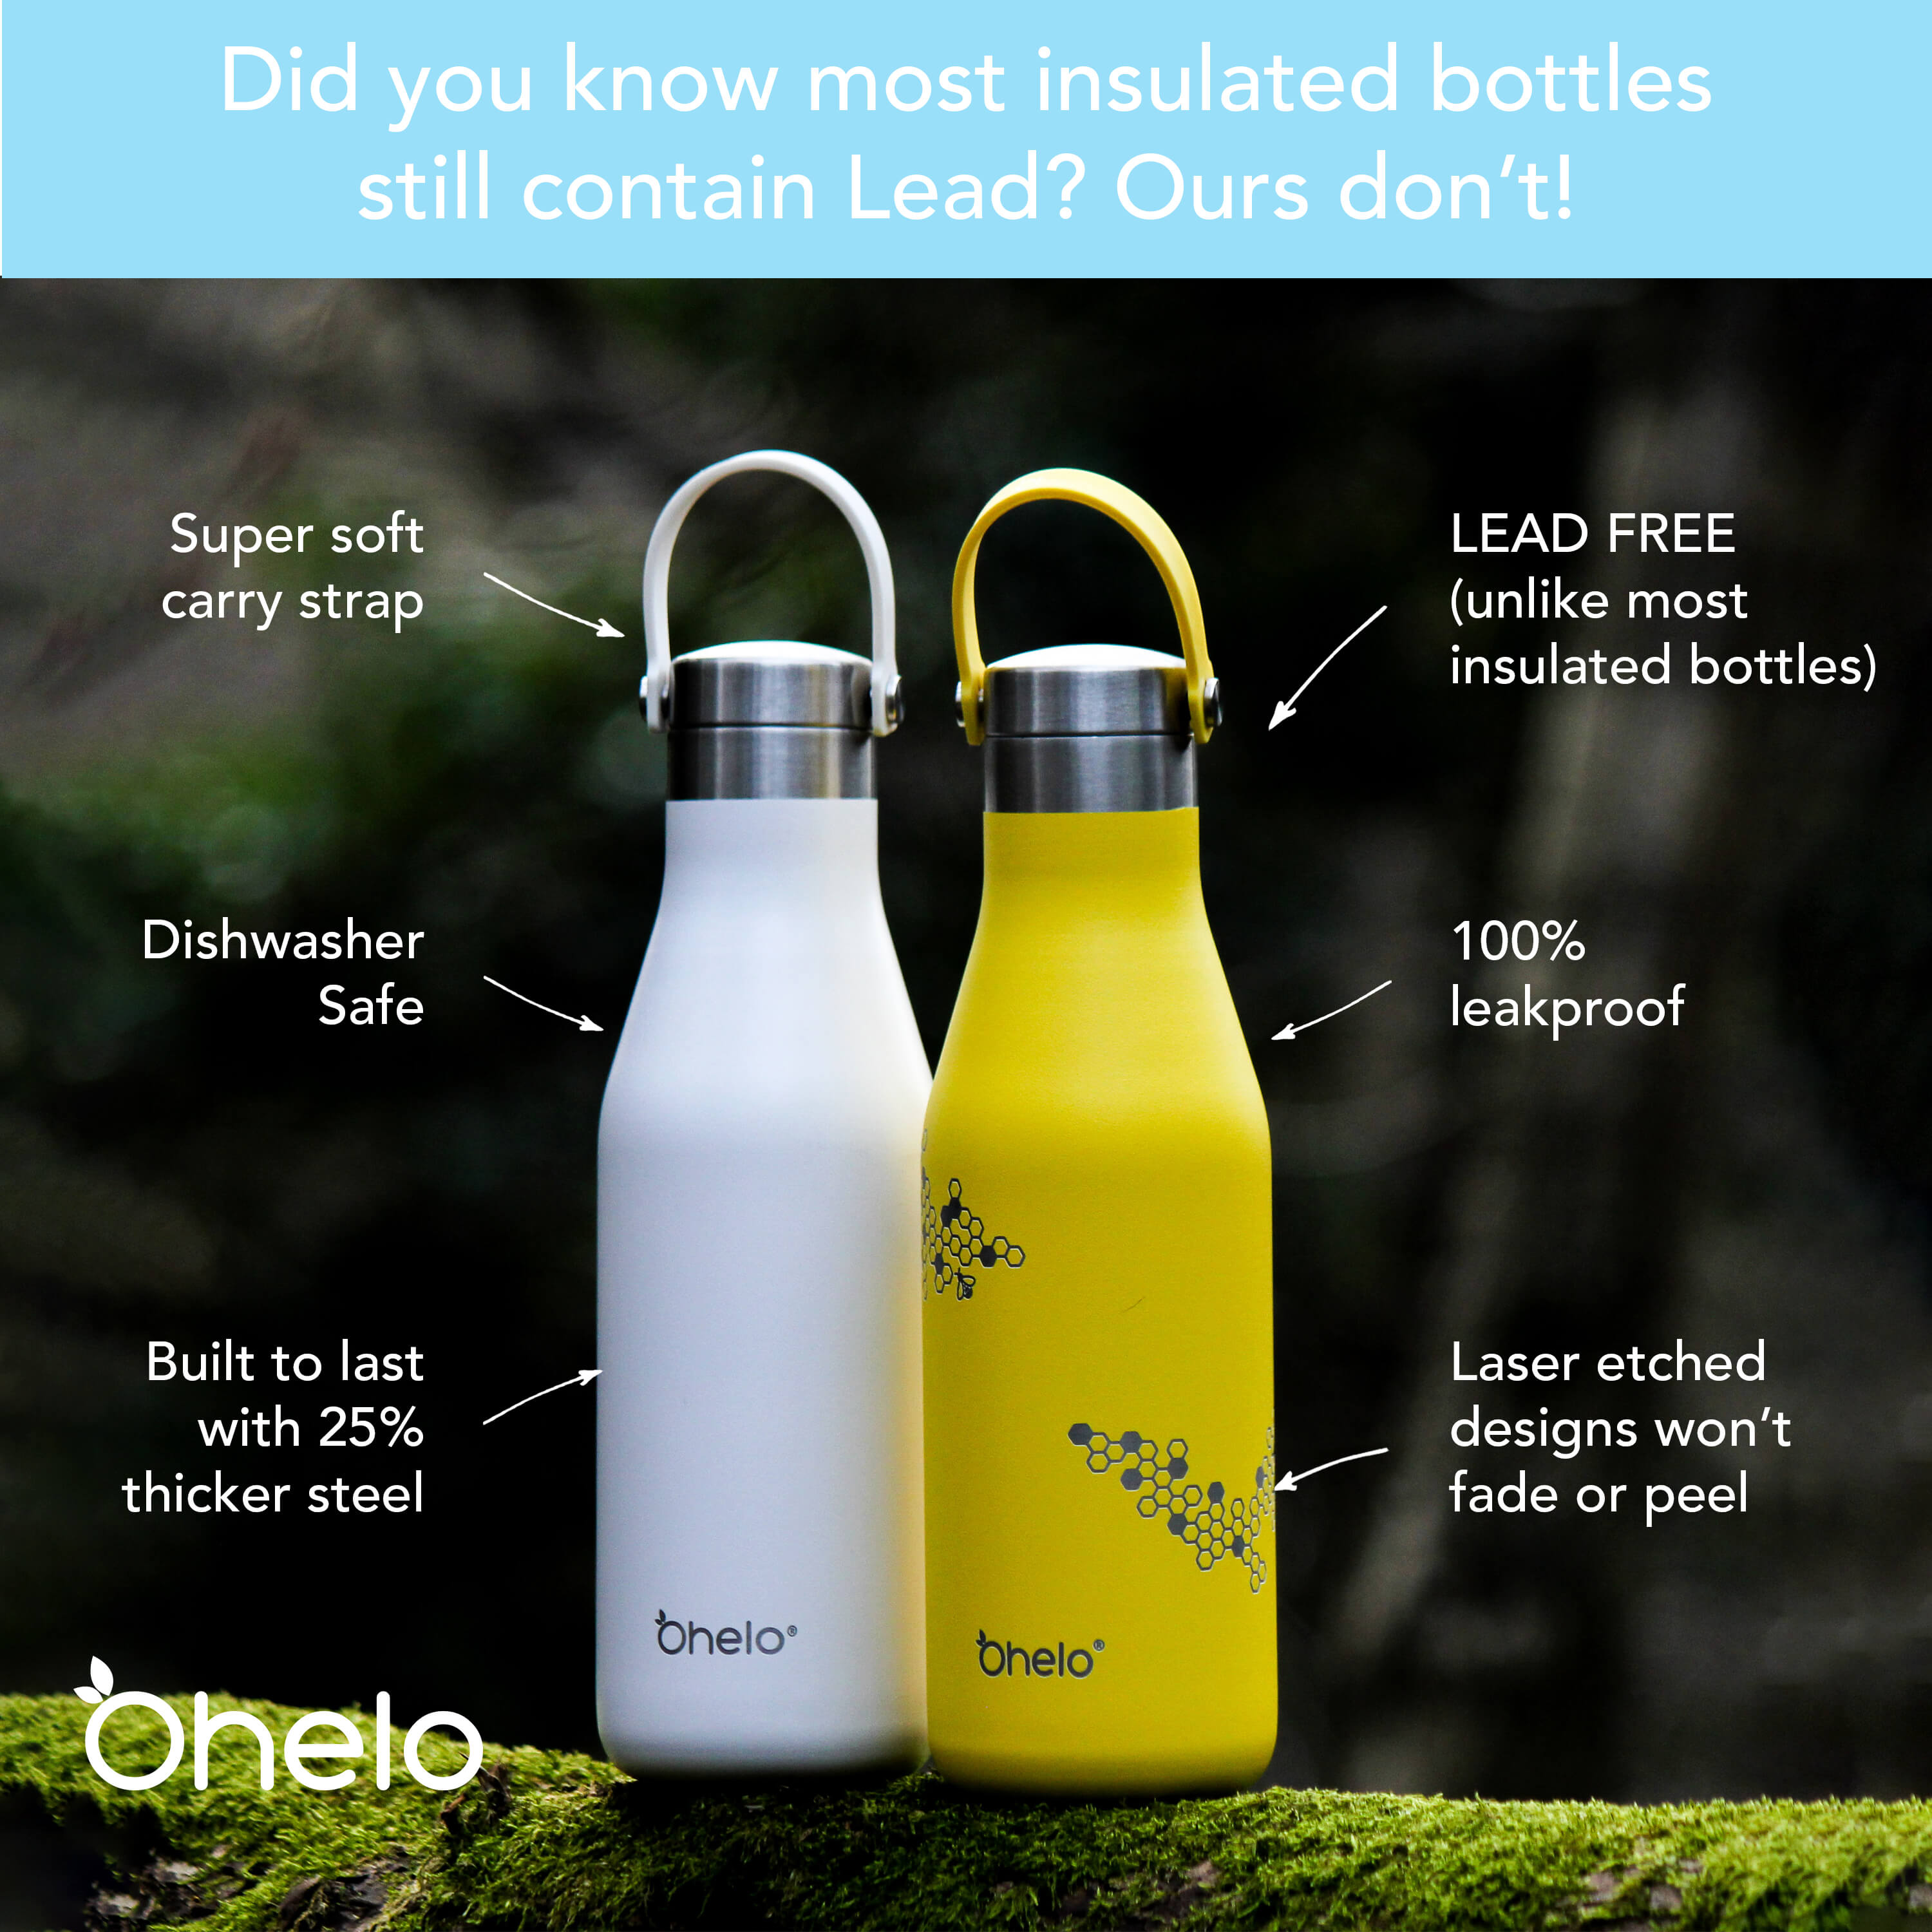 Say Ohelo to the UK's only lead free insulated bottle brand